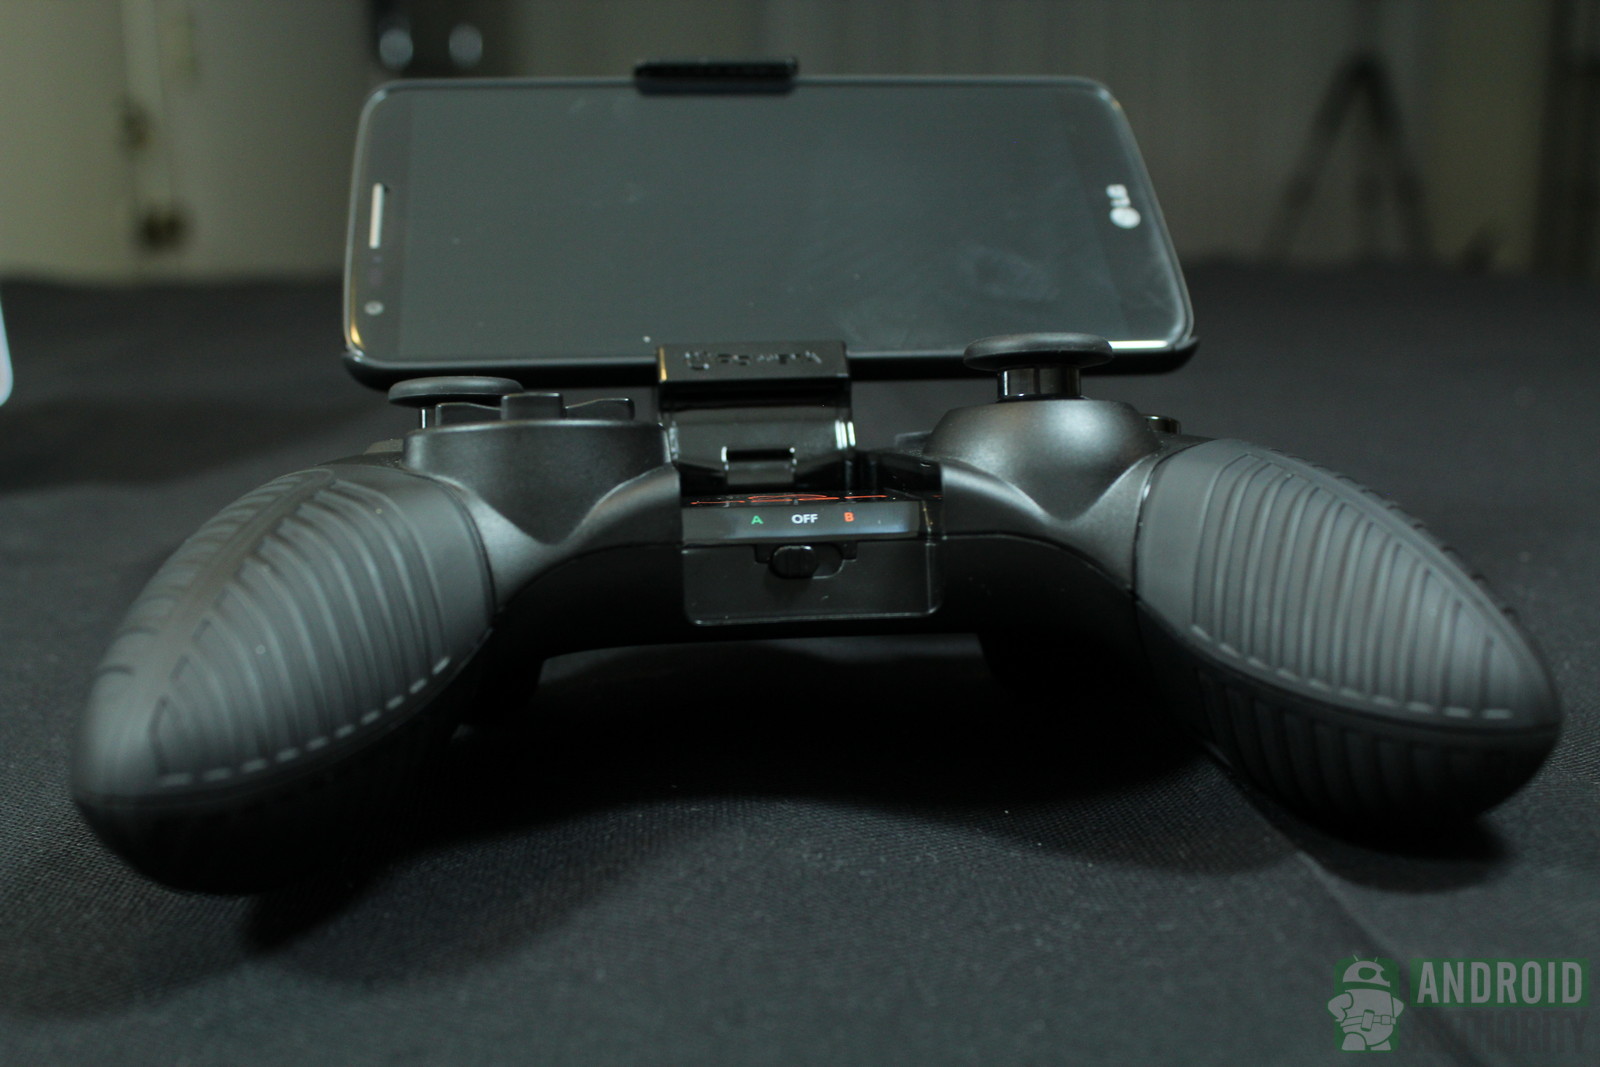 Android games for the moga controller